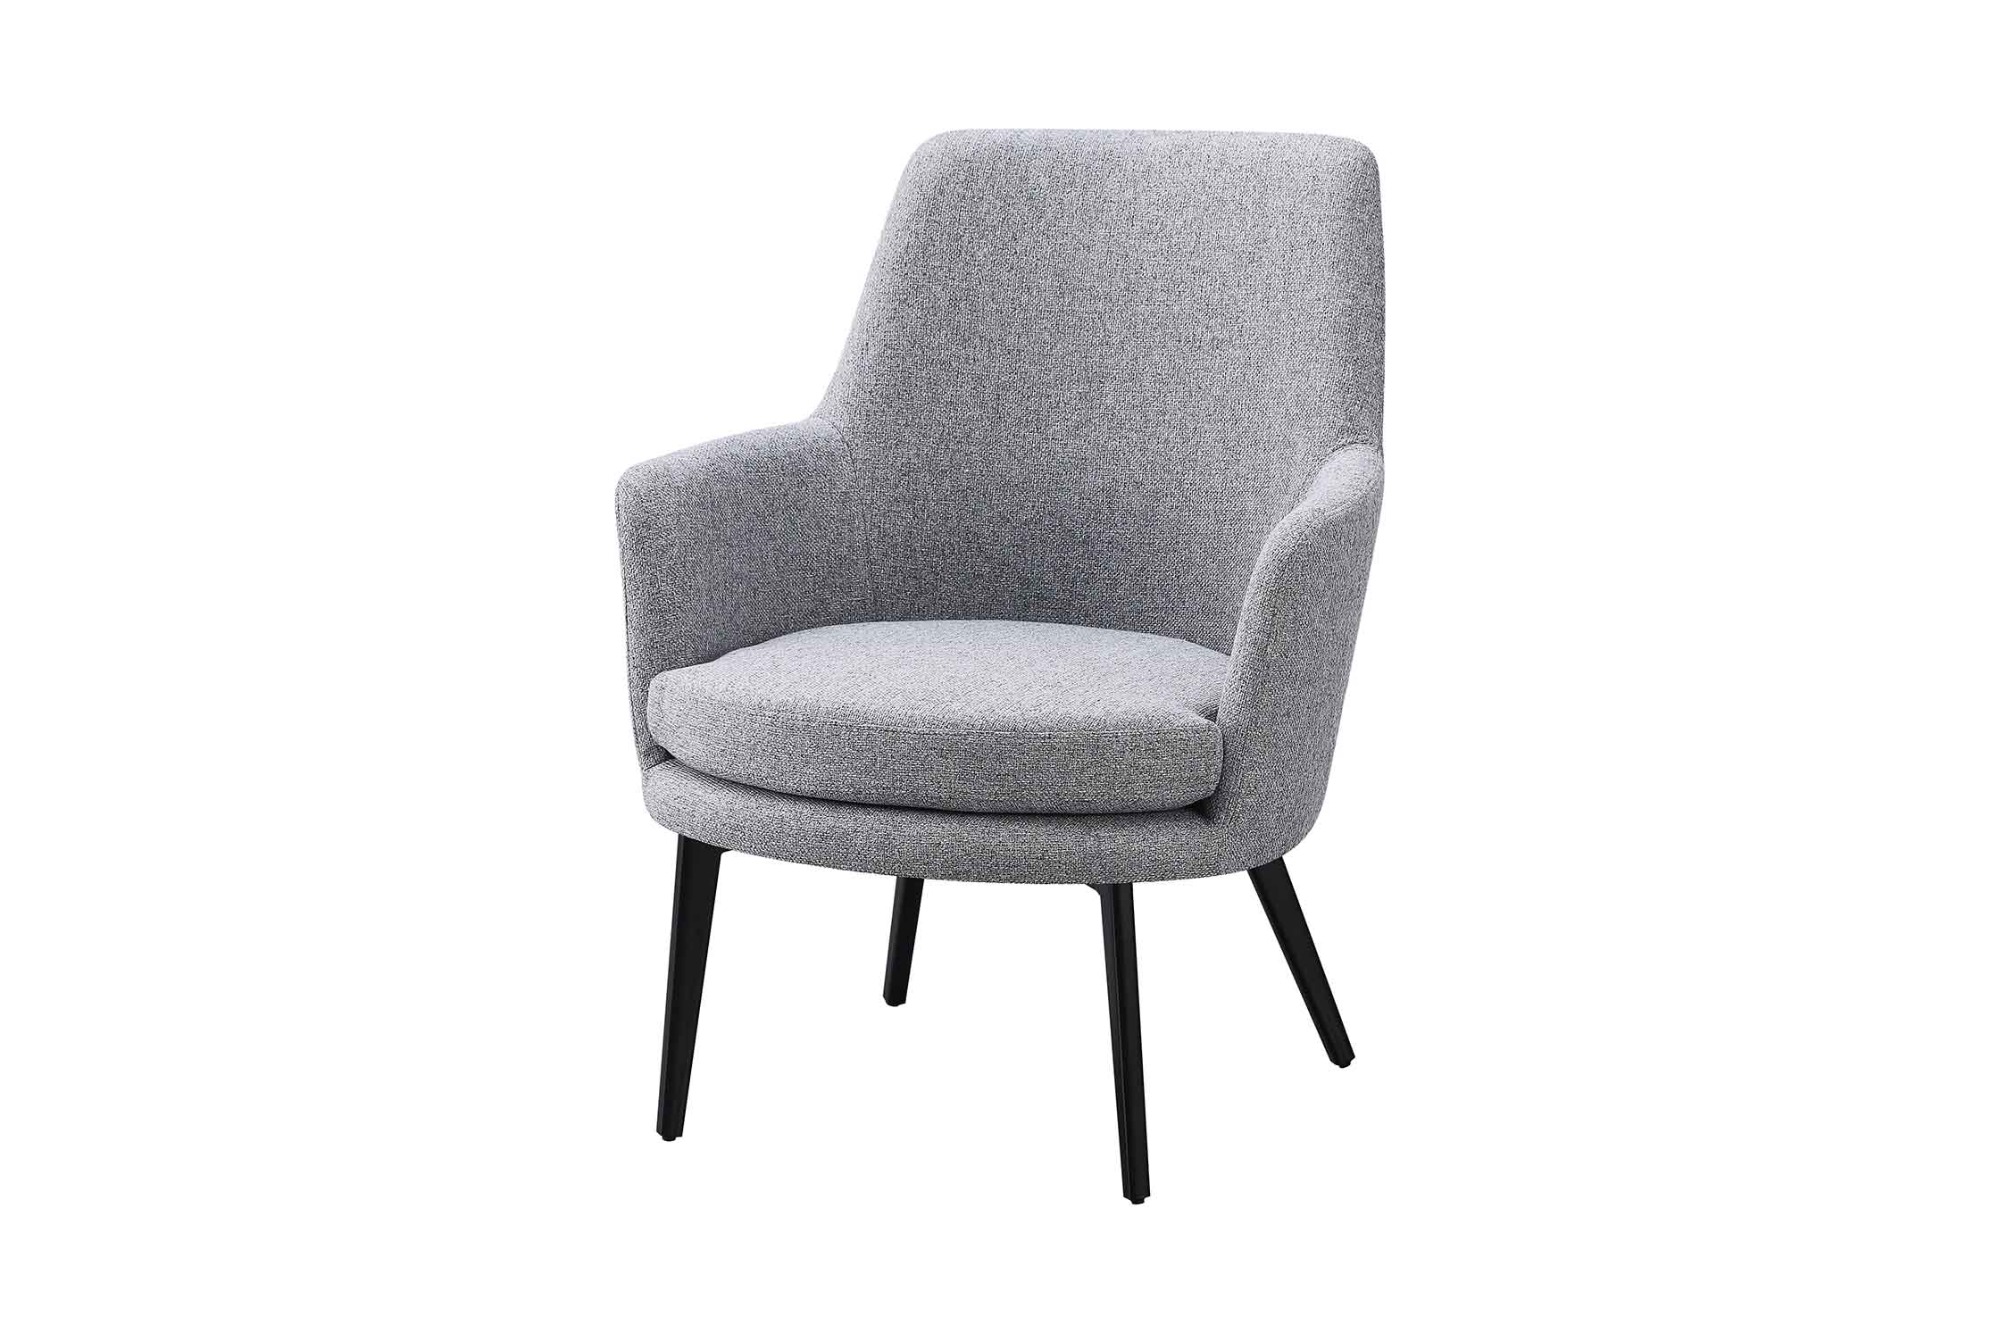 New Accent Chair with Good Price